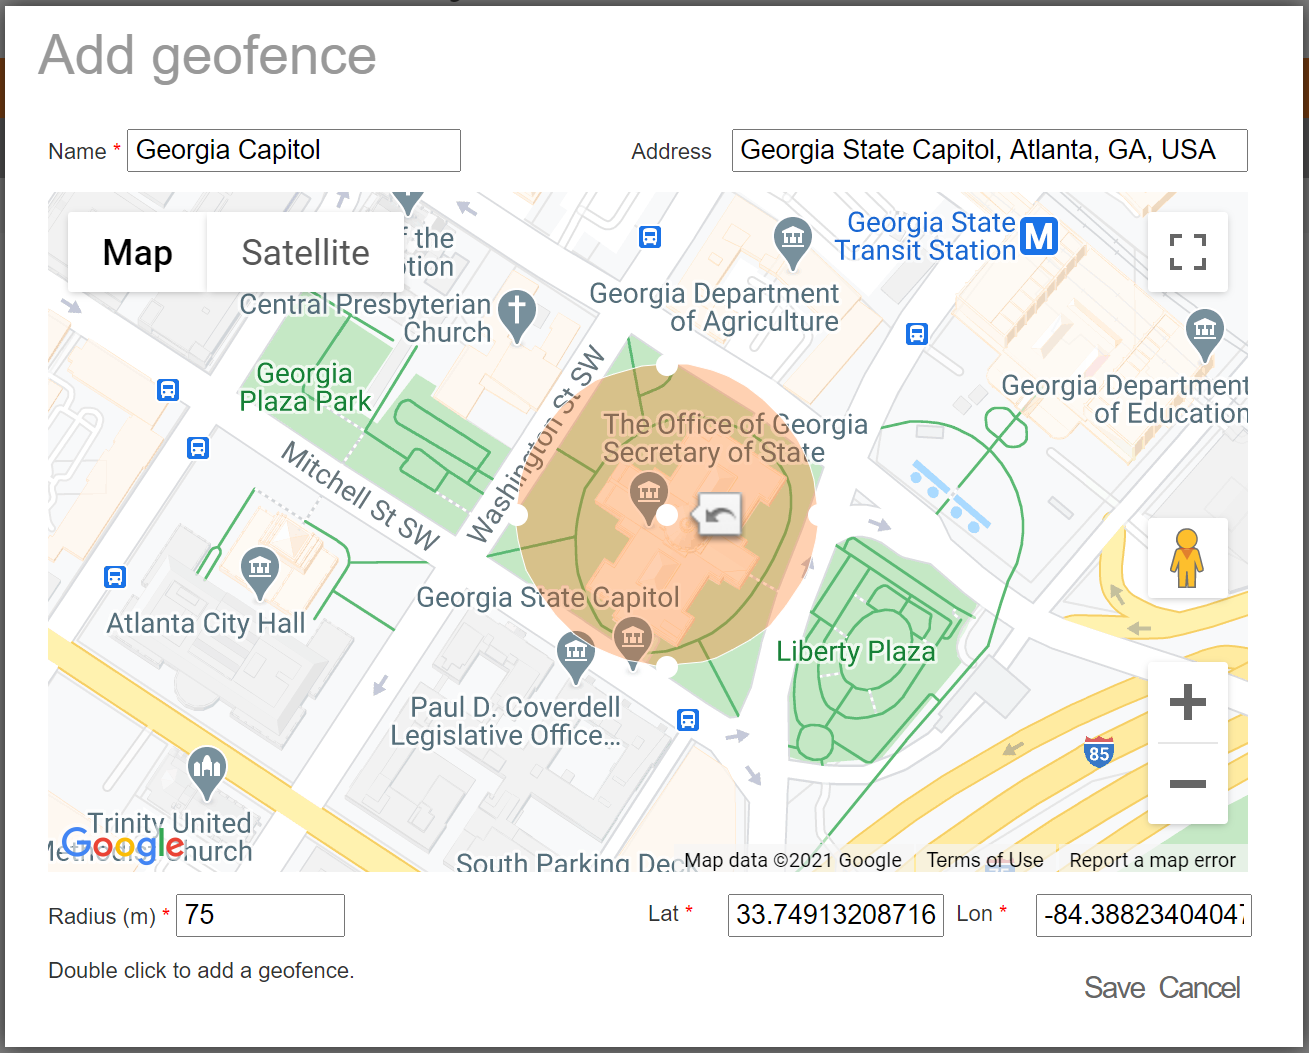 Add_geofence_2.PNG